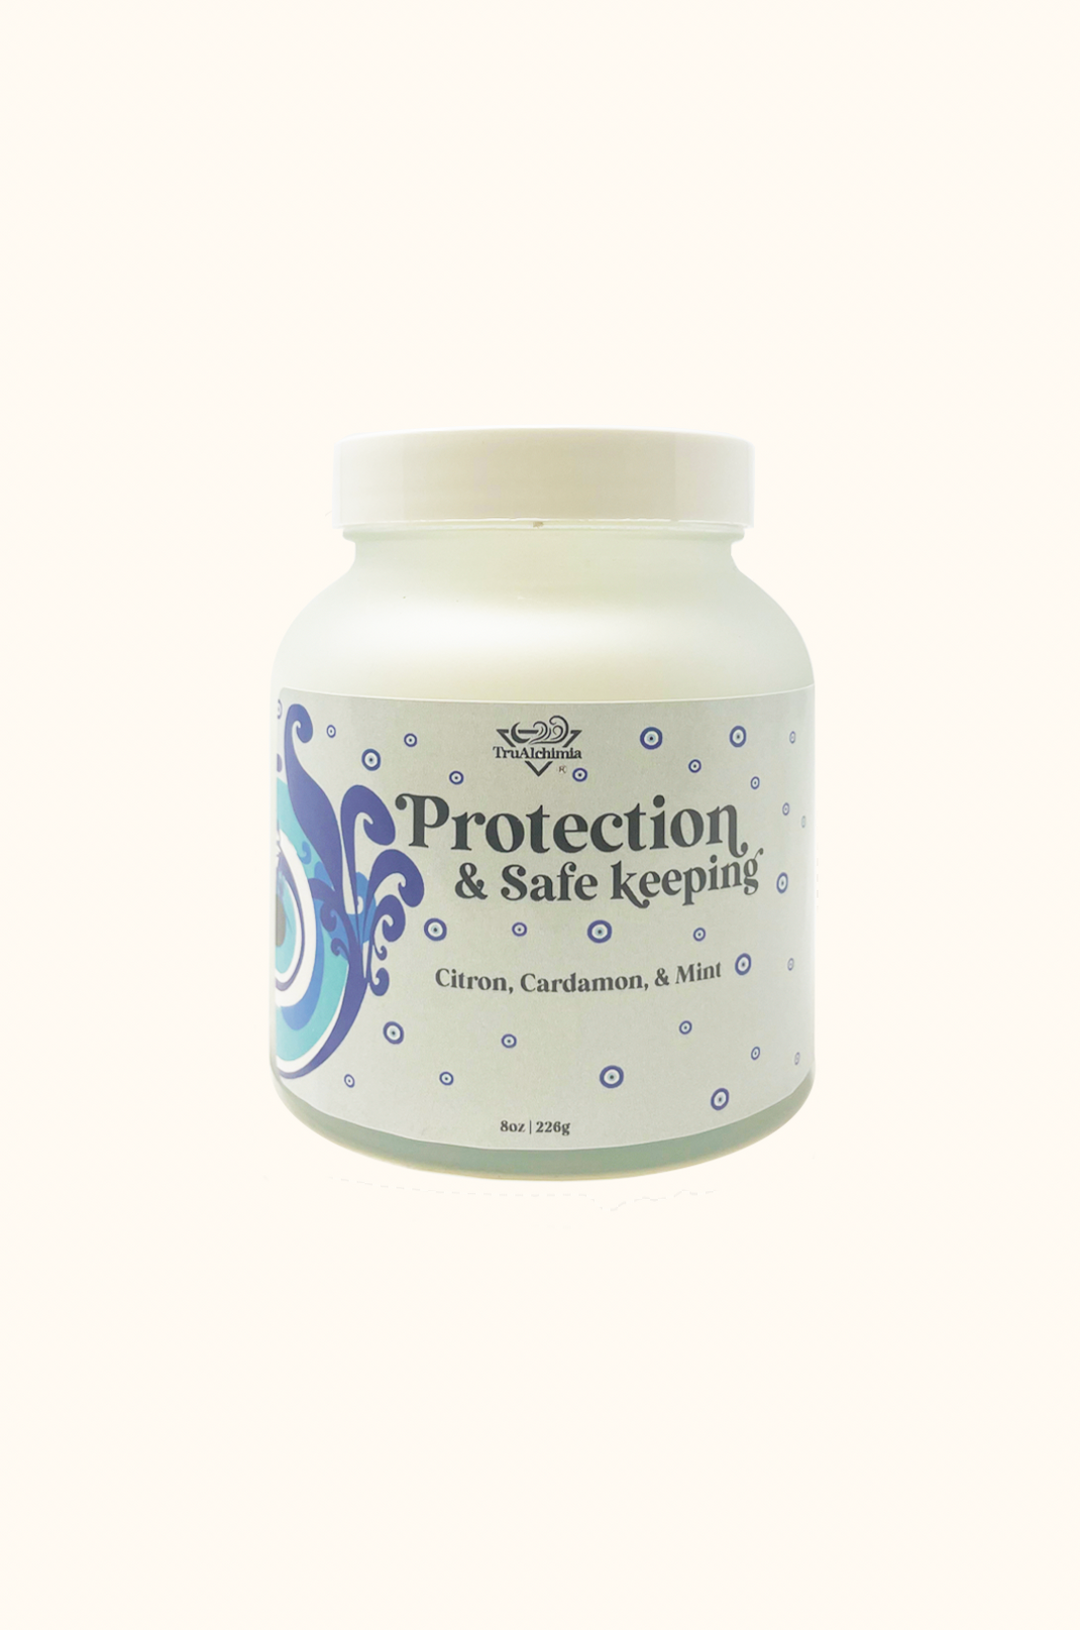 Protection & Sage Keeping Candle